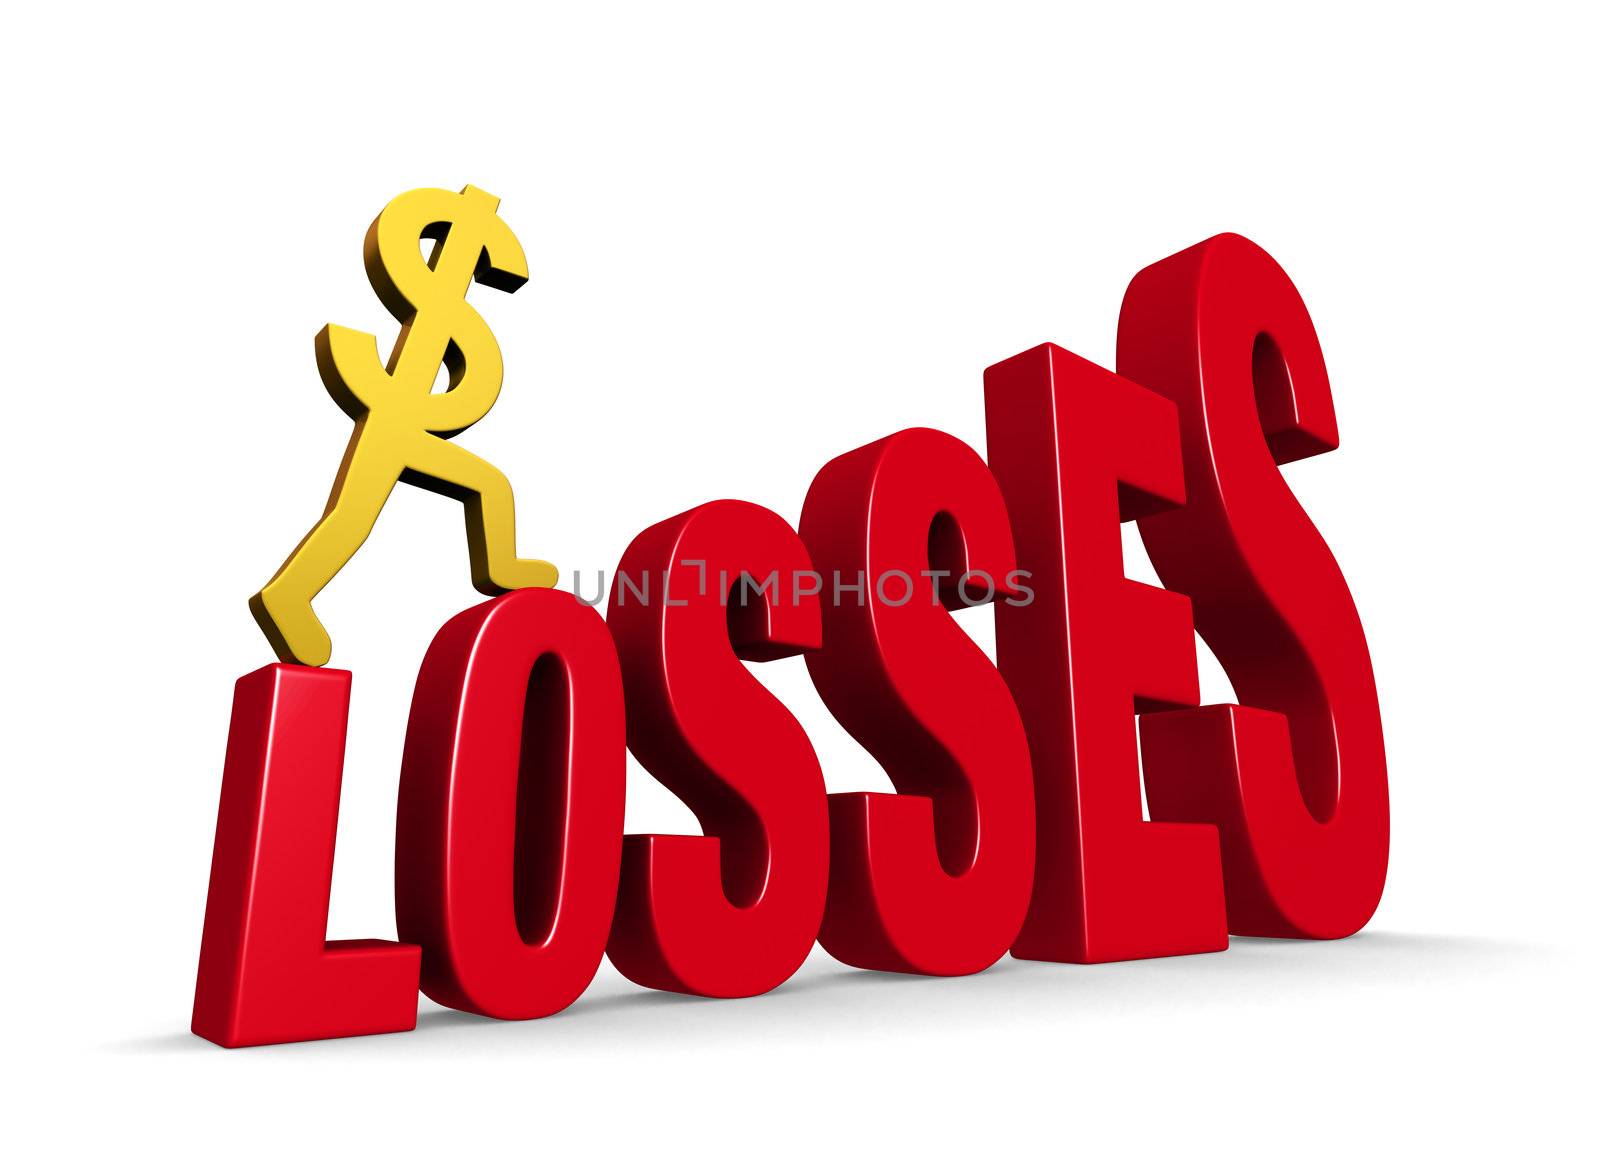 A gold dollar sign climbing steps forming the word, "LOSSES". On white with drop shadow.